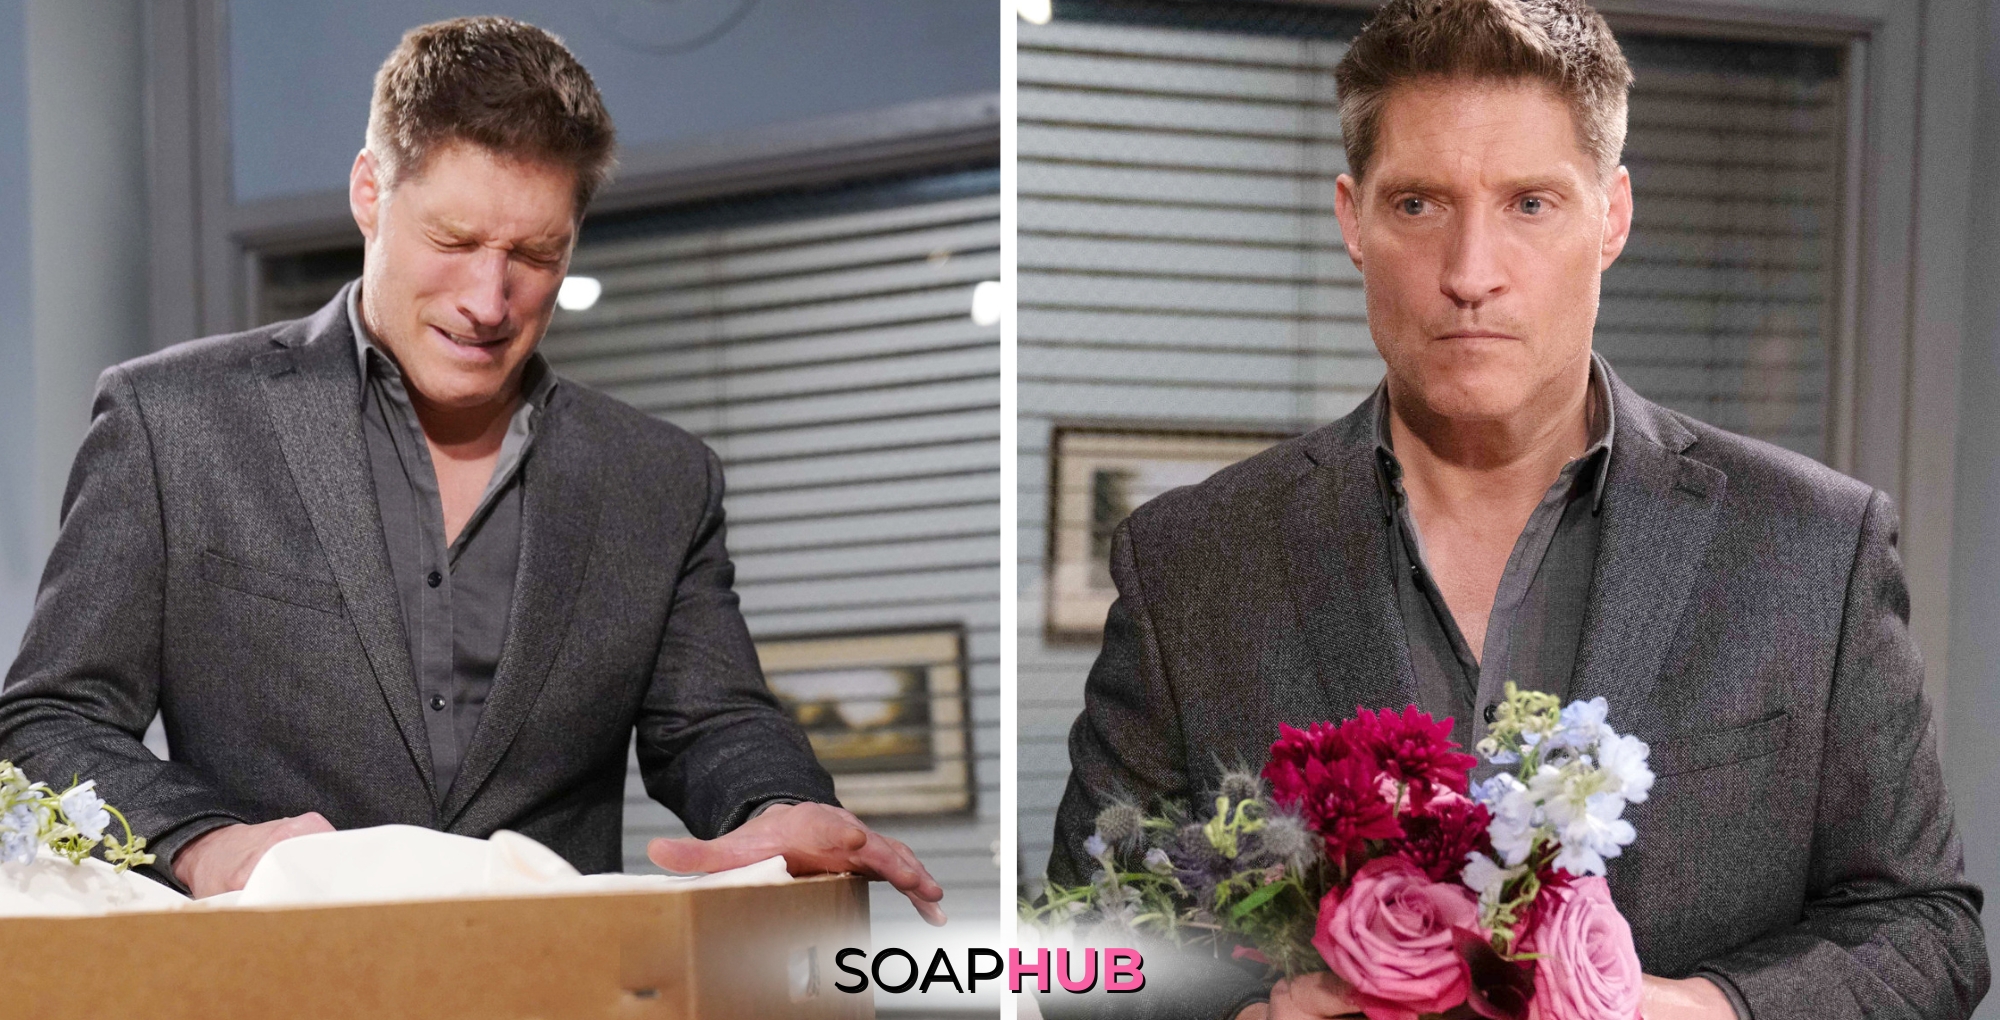 Bold and the Beautiful Spoilers for Friday, April 5 Episode 9244 Features Deacon with the Soap Hub Logo Across the Bottom.